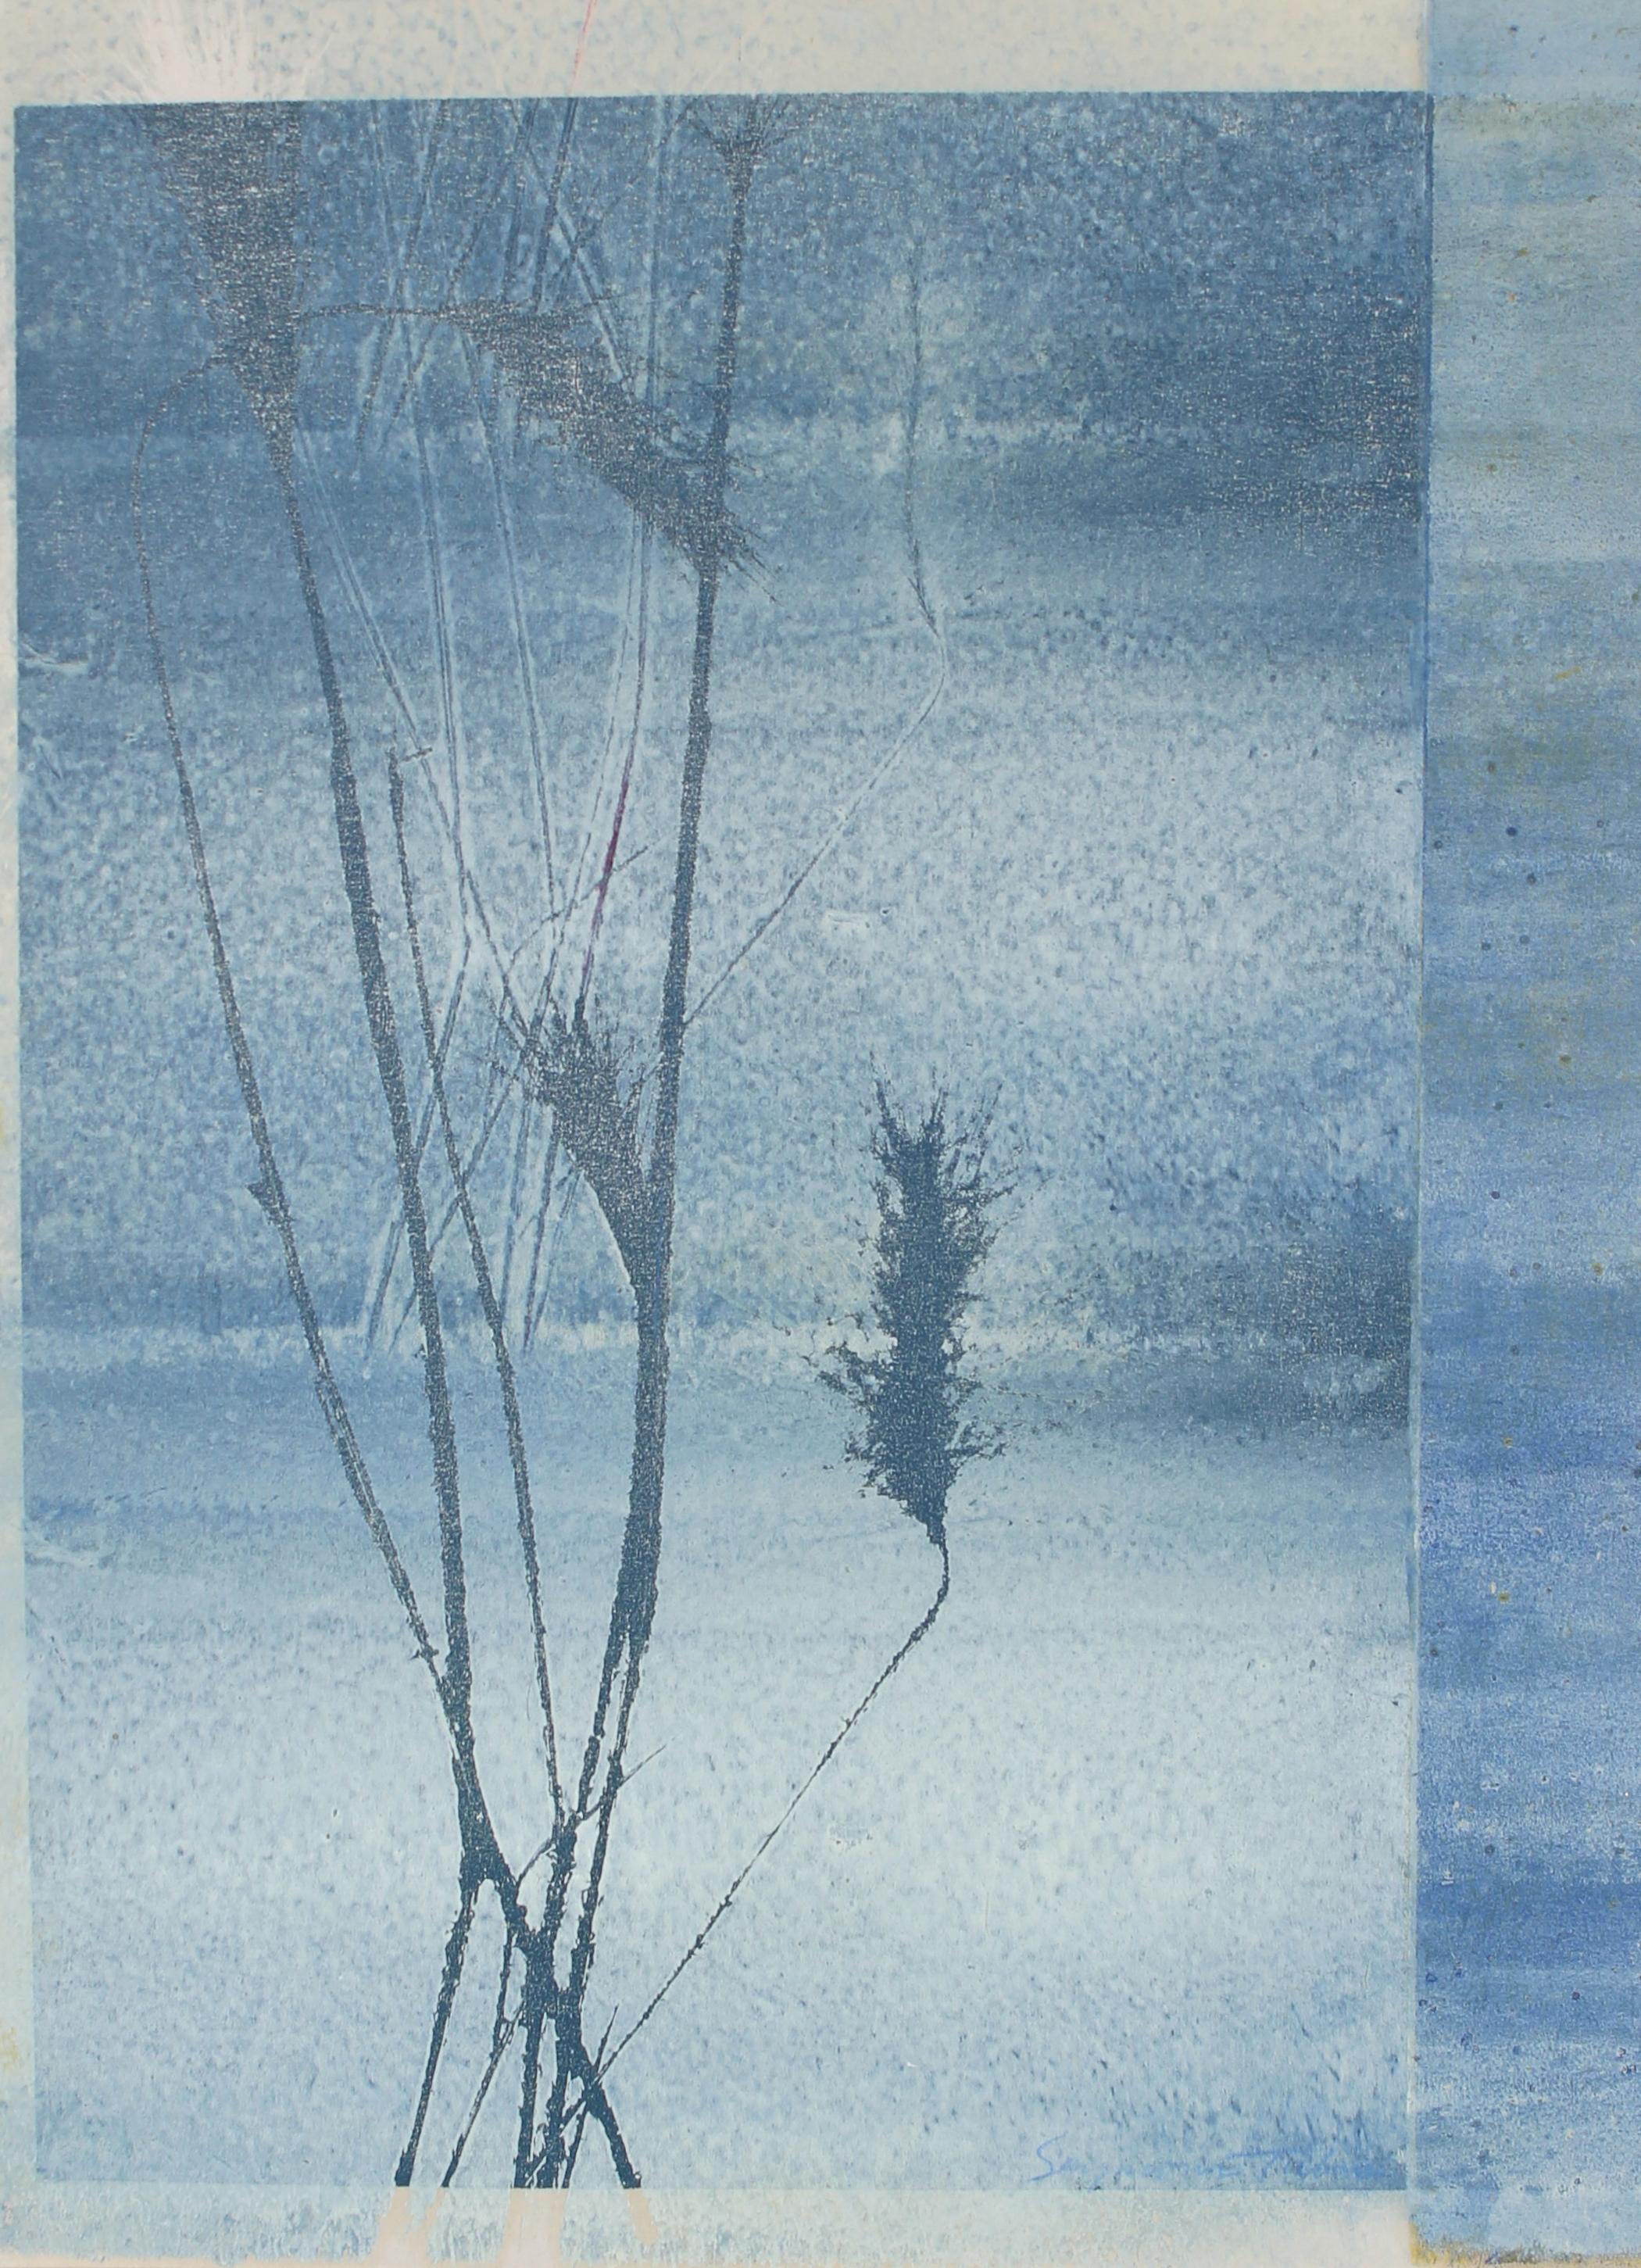 "Morning Frost", Mixed Media Nature Print with Wheat Plants in Blue - Mixed Media Art by Seymour Tubis